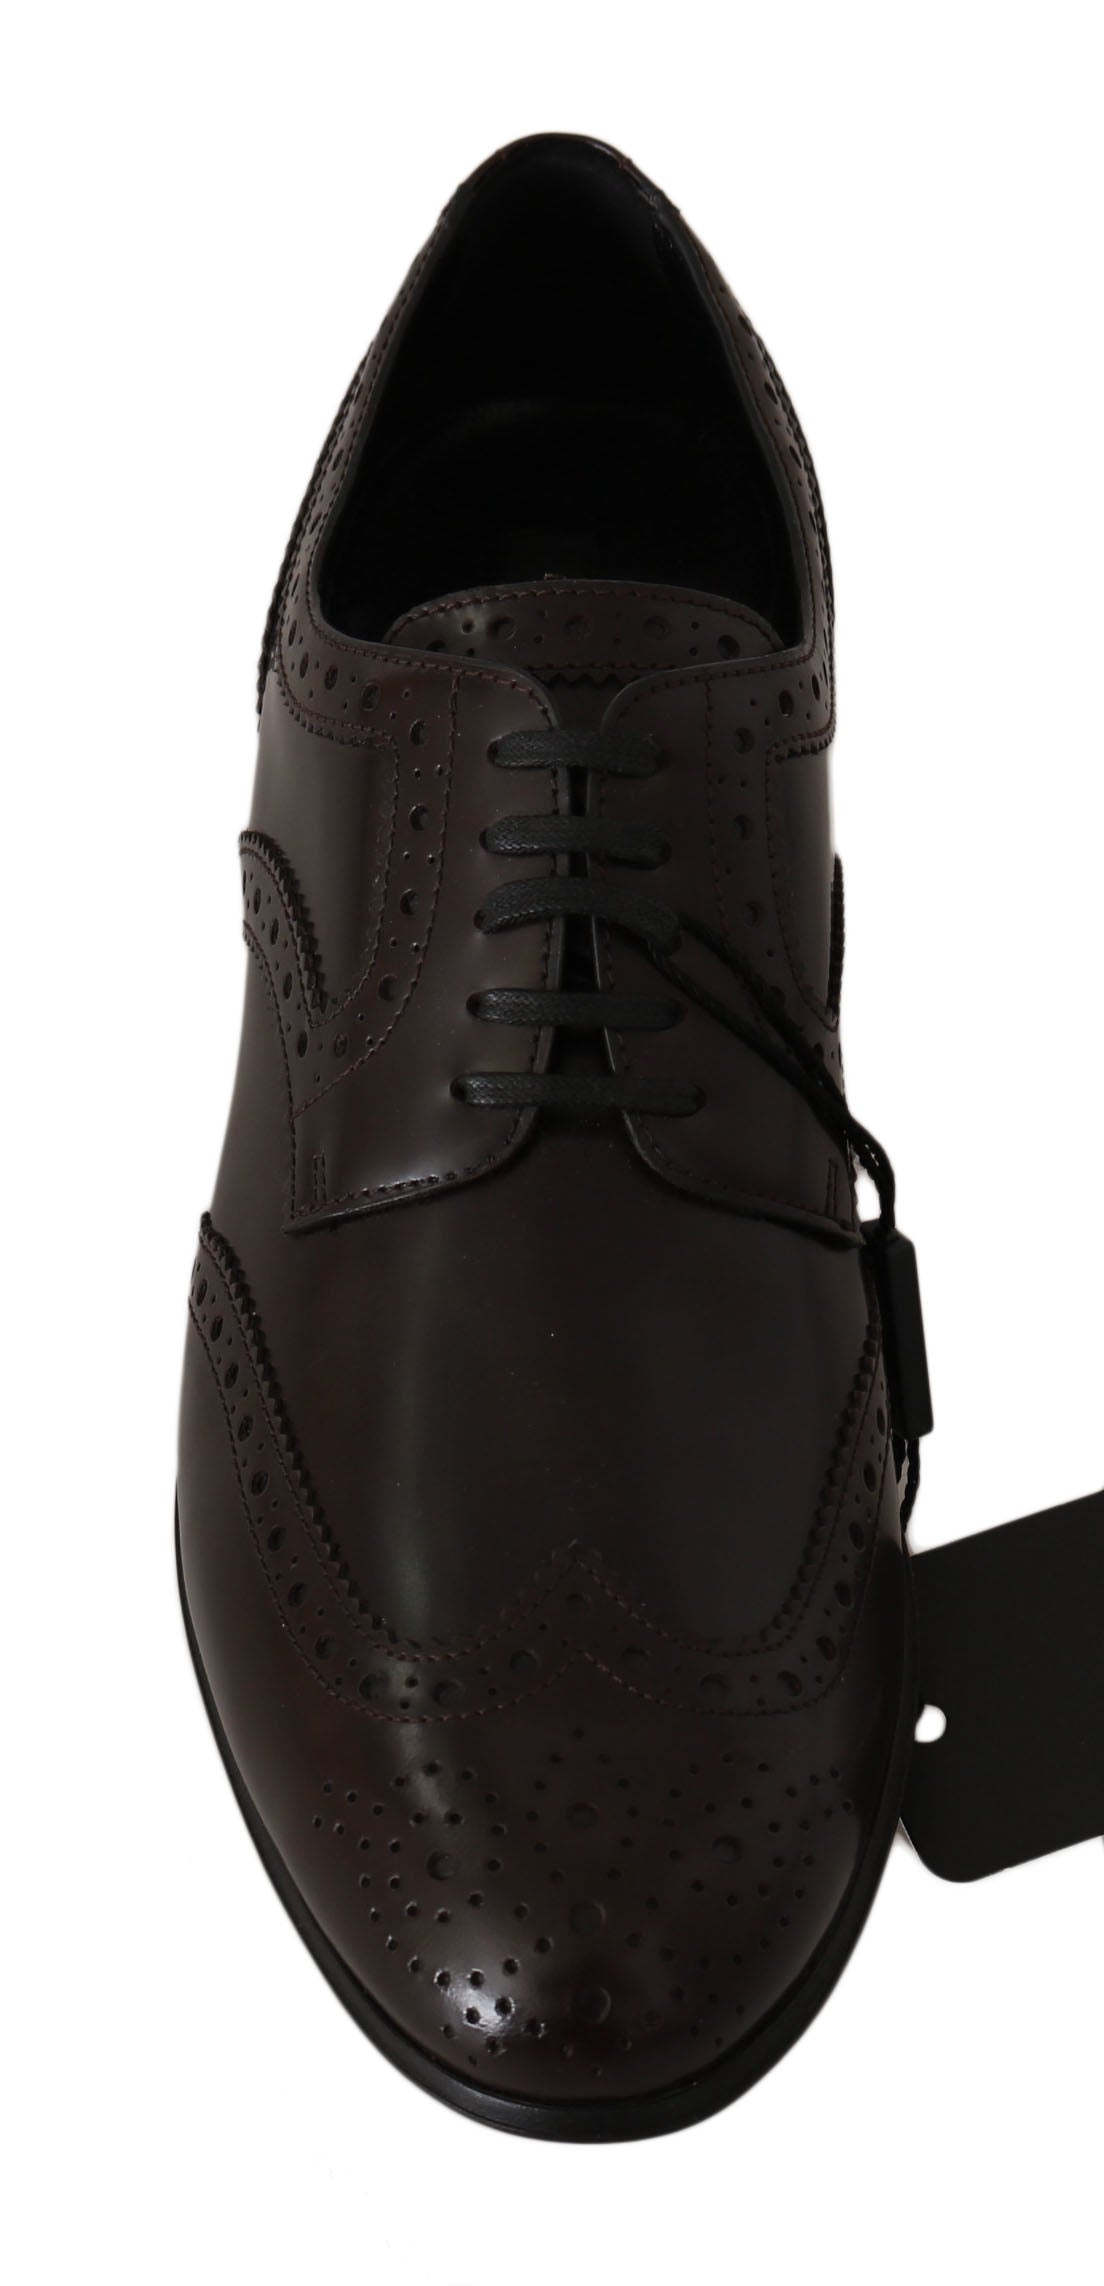 Brown Leather Broques Oxford Wingtip Shoes - Designed by Dolce & Gabbana Available to Buy at a Discounted Price on Moon Behind The Hill Online Designer Discount Store